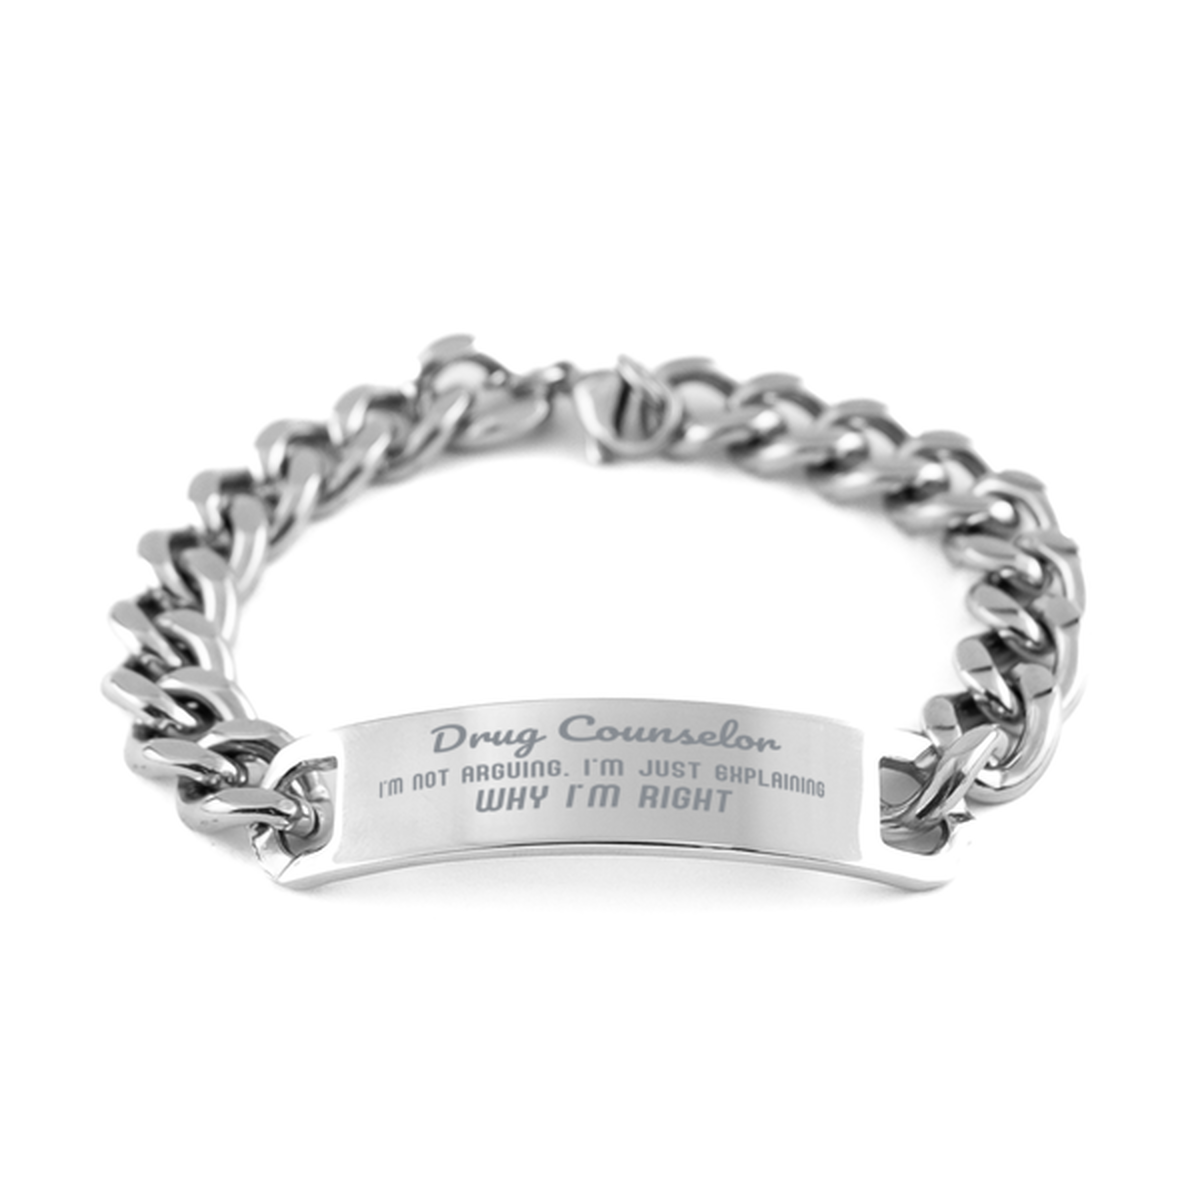 Drug Counselor I'm not Arguing. I'm Just Explaining Why I'm RIGHT Cuban Chain Stainless Steel Bracelet, Graduation Birthday Christmas Drug Counselor Gifts For Drug Counselor Funny Saying Quote Present for Men Women Coworker